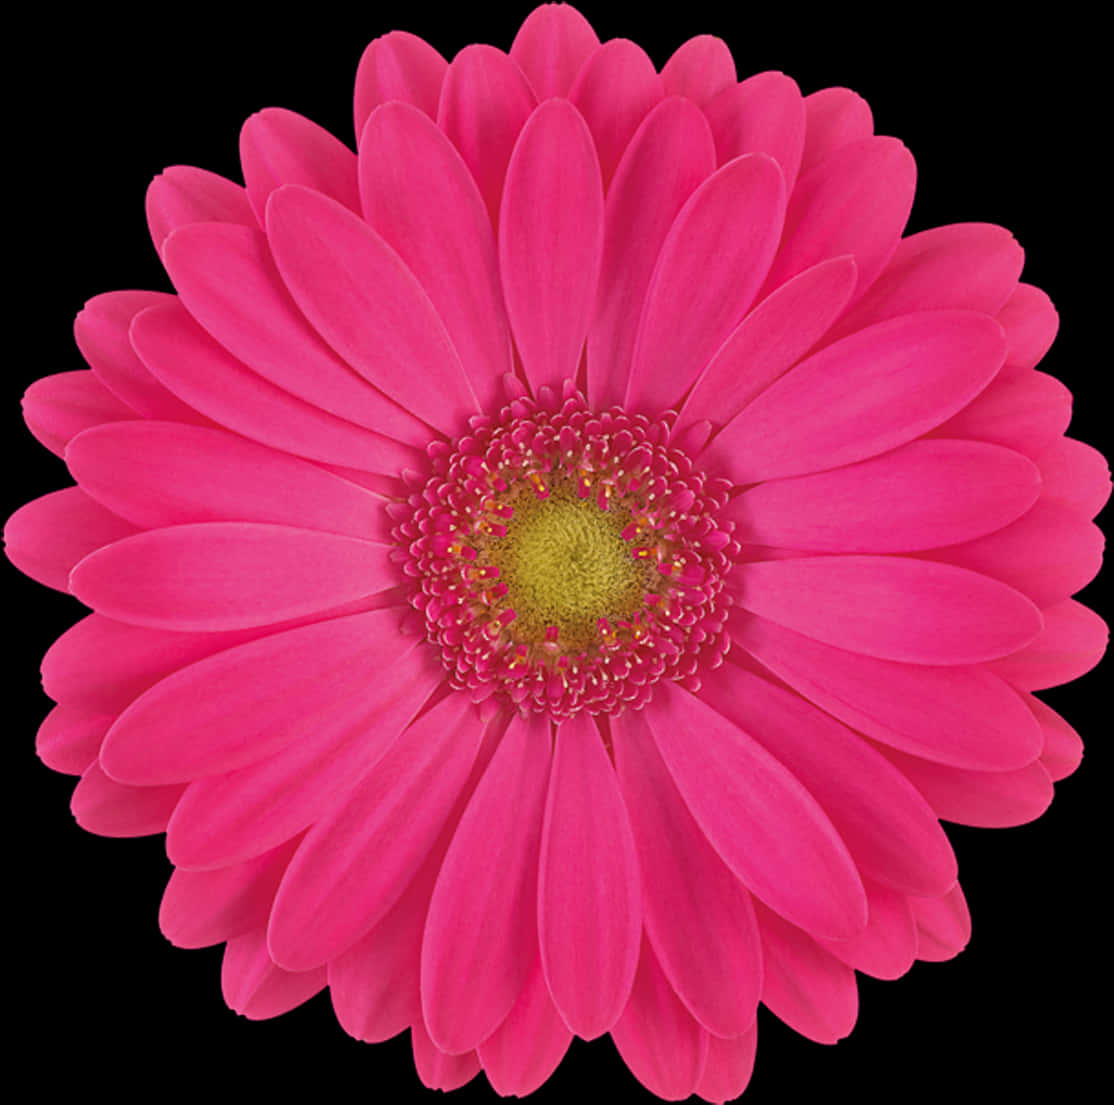 A Pink Flower With Yellow Center